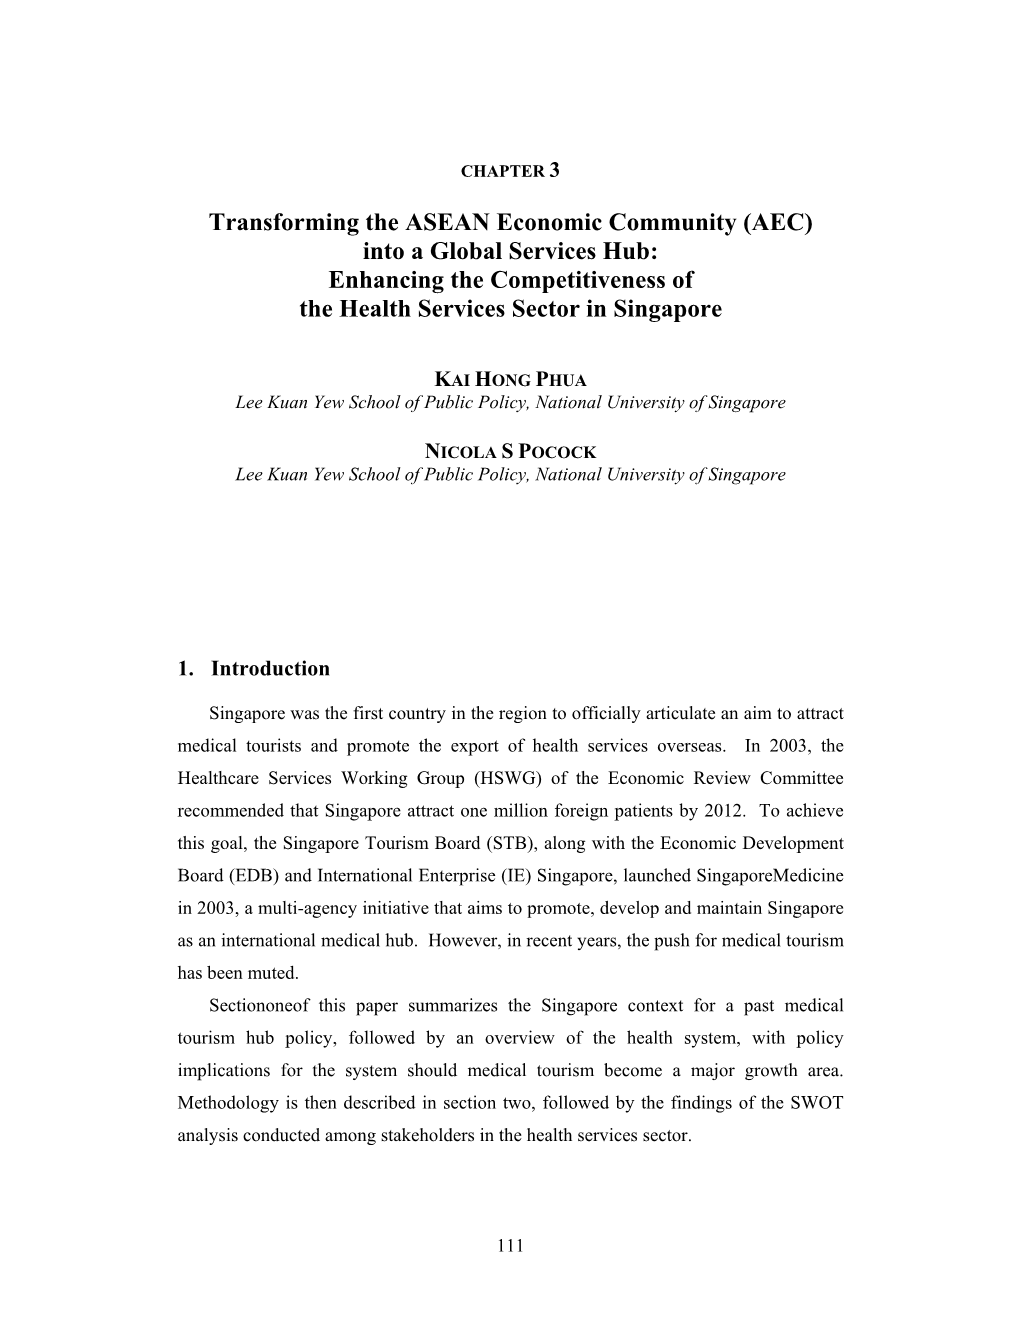 Enhancing the Competitiveness of the Health Services Sector in Singapore